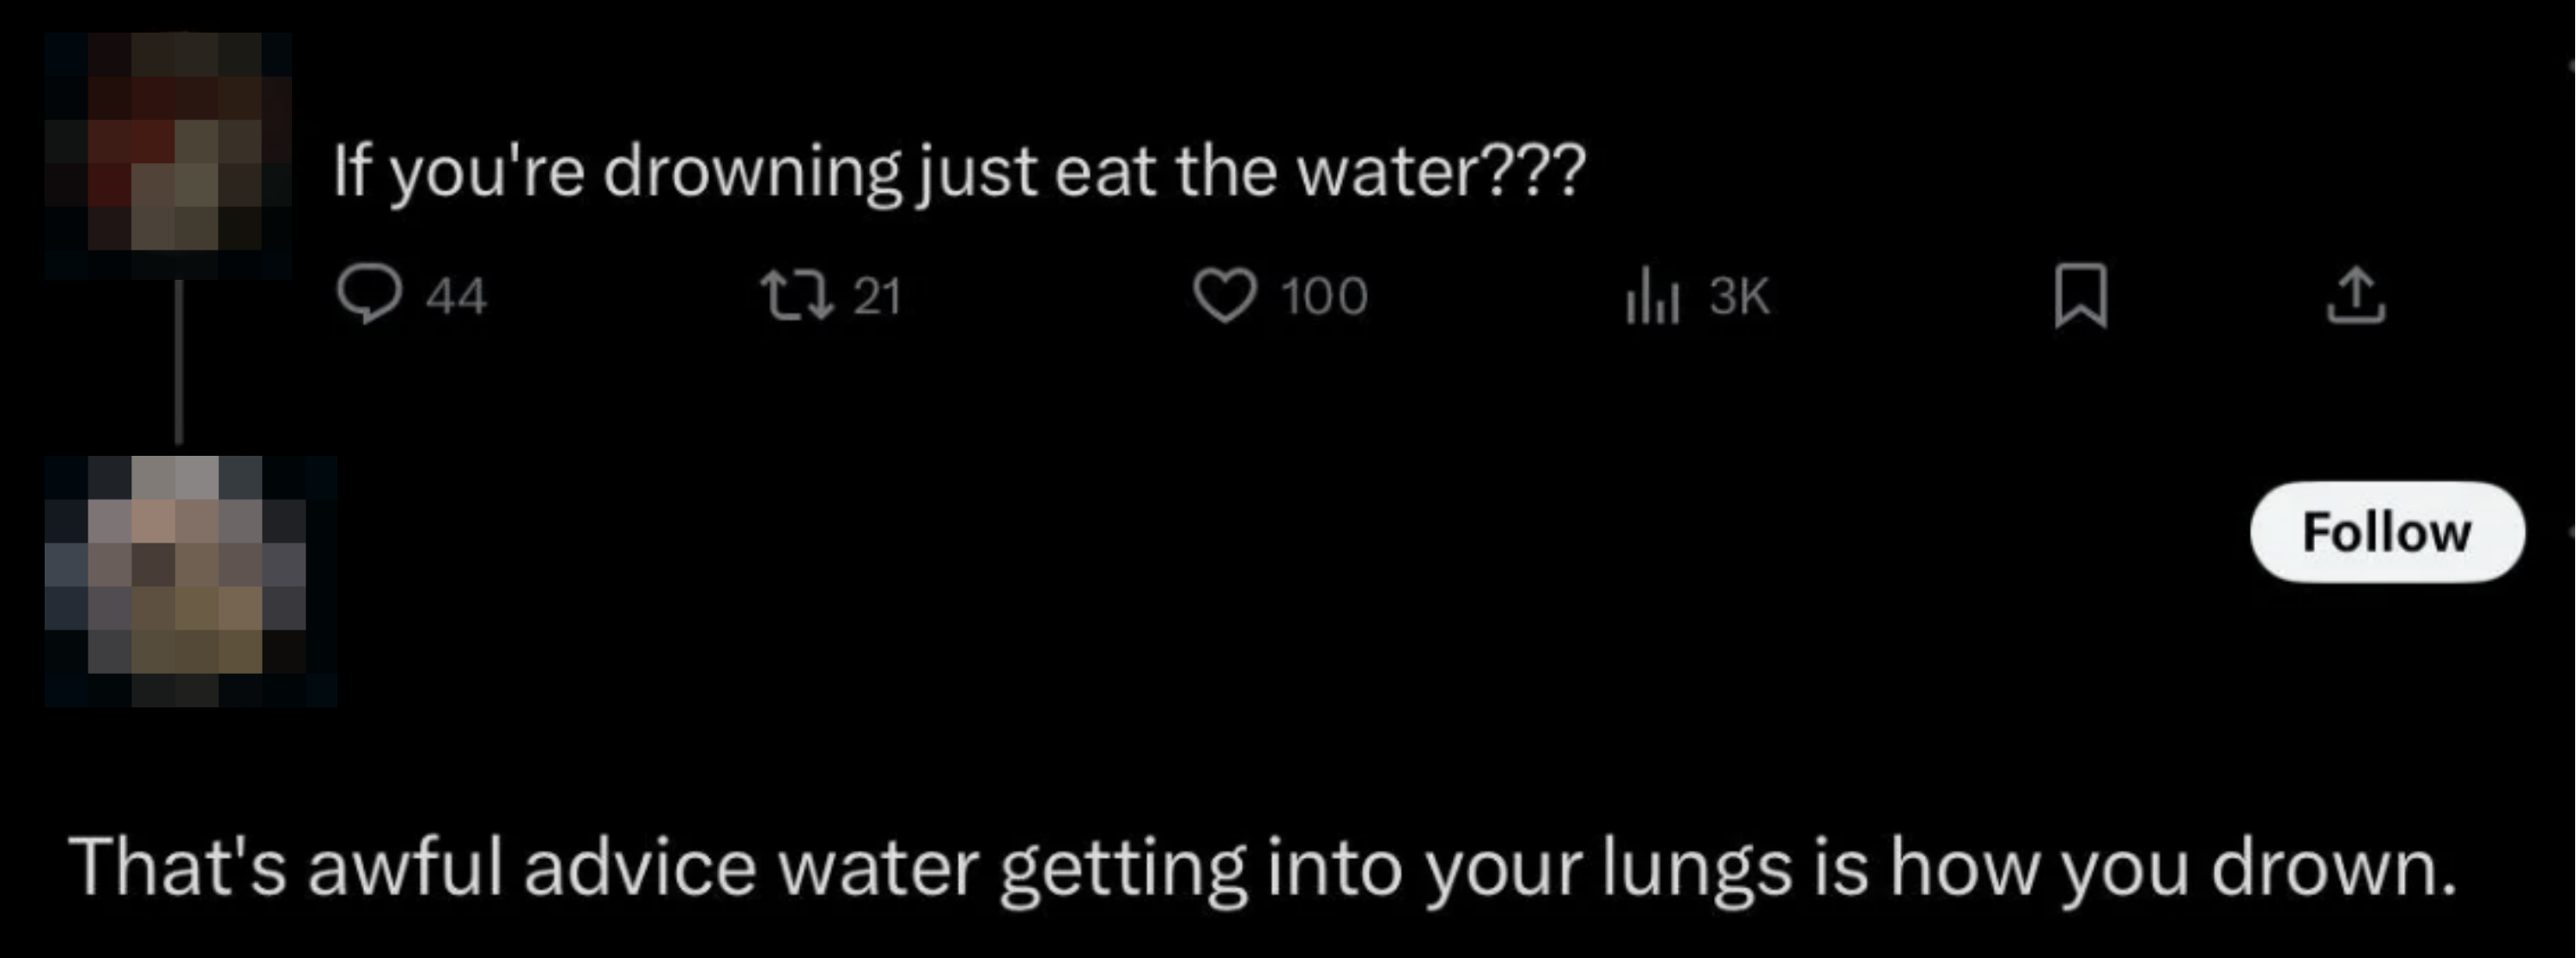 Social media screenshot: Top text is a humorous question about eating water to avoid drowning; response explains the danger of water in lungs